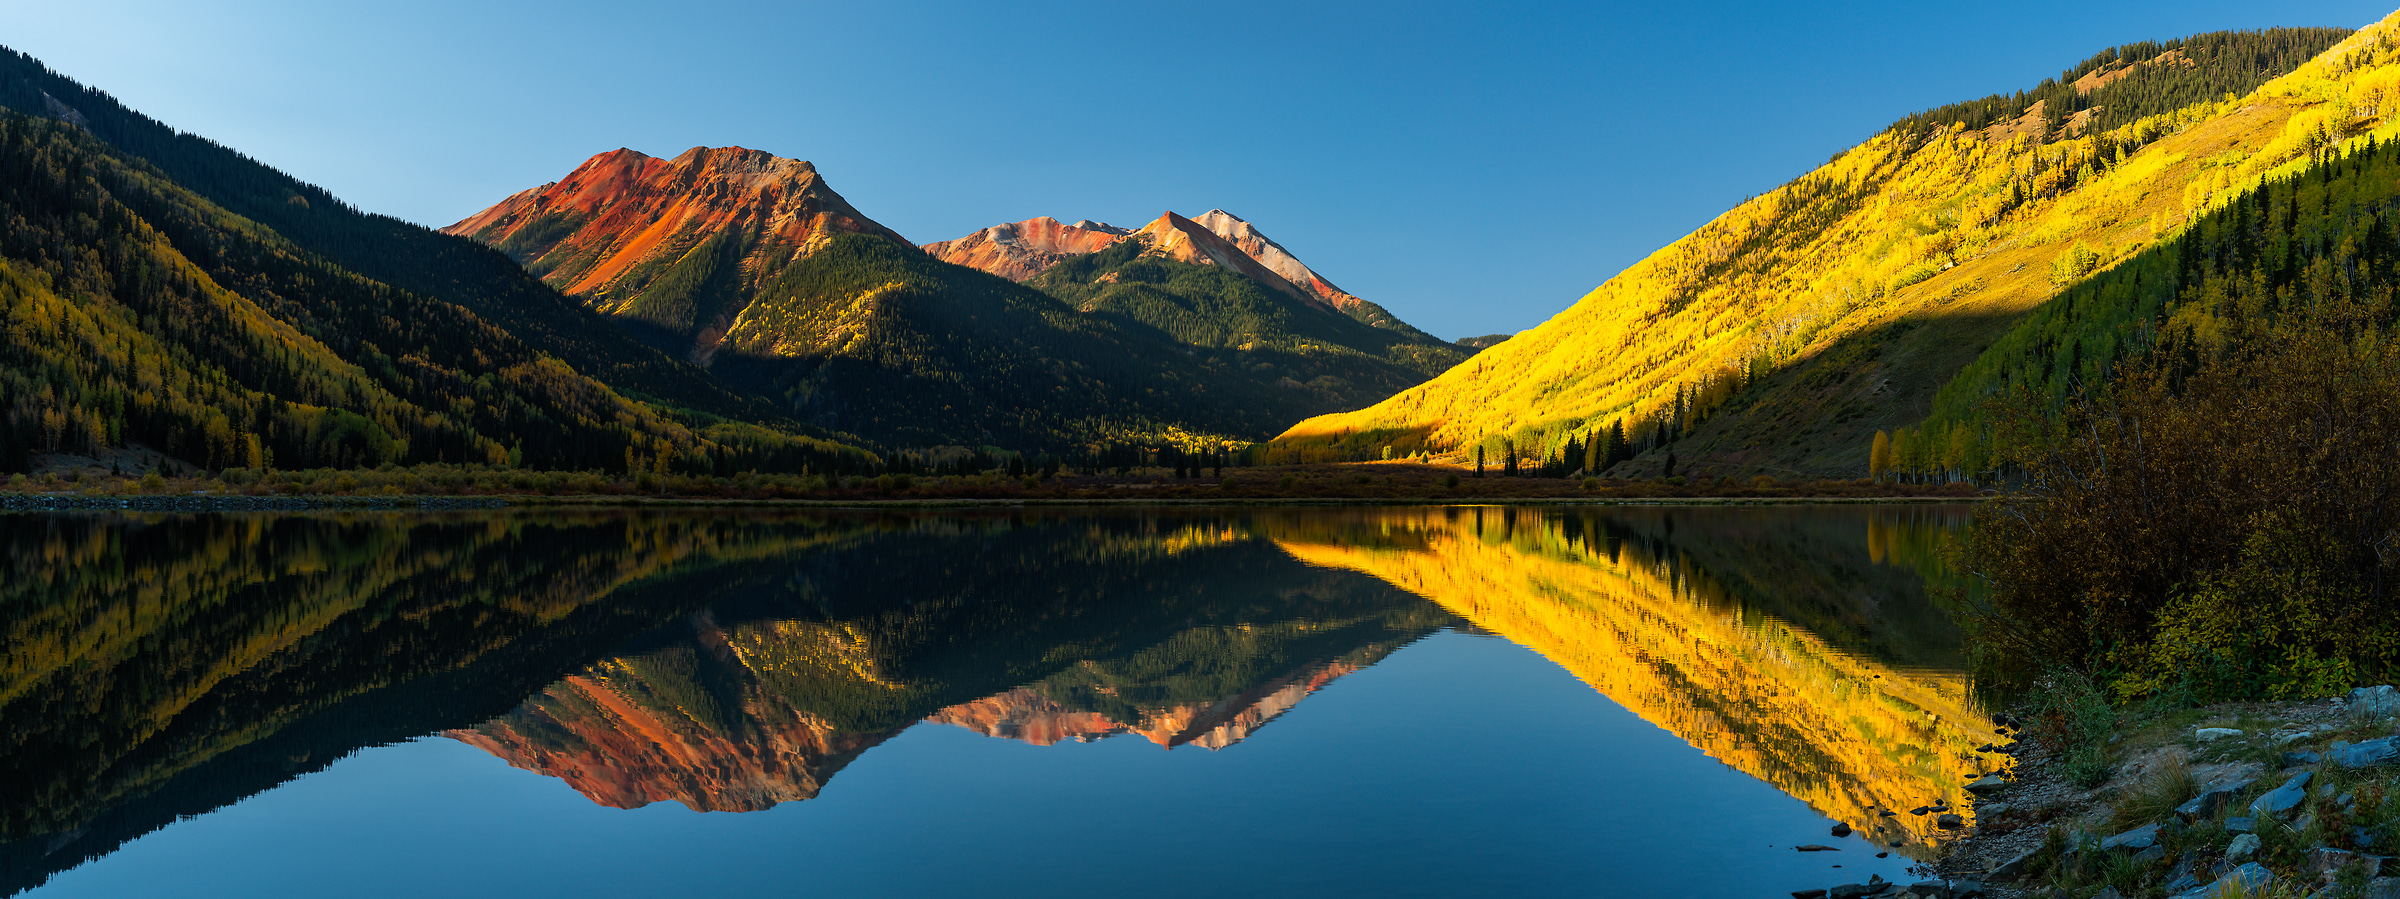 160 megapixels! A very high resolution, large-format VAST photo print of an autumn landscape with mountains and a lake; landscape photograph created by Phillip Noll in Ouray, Colorado